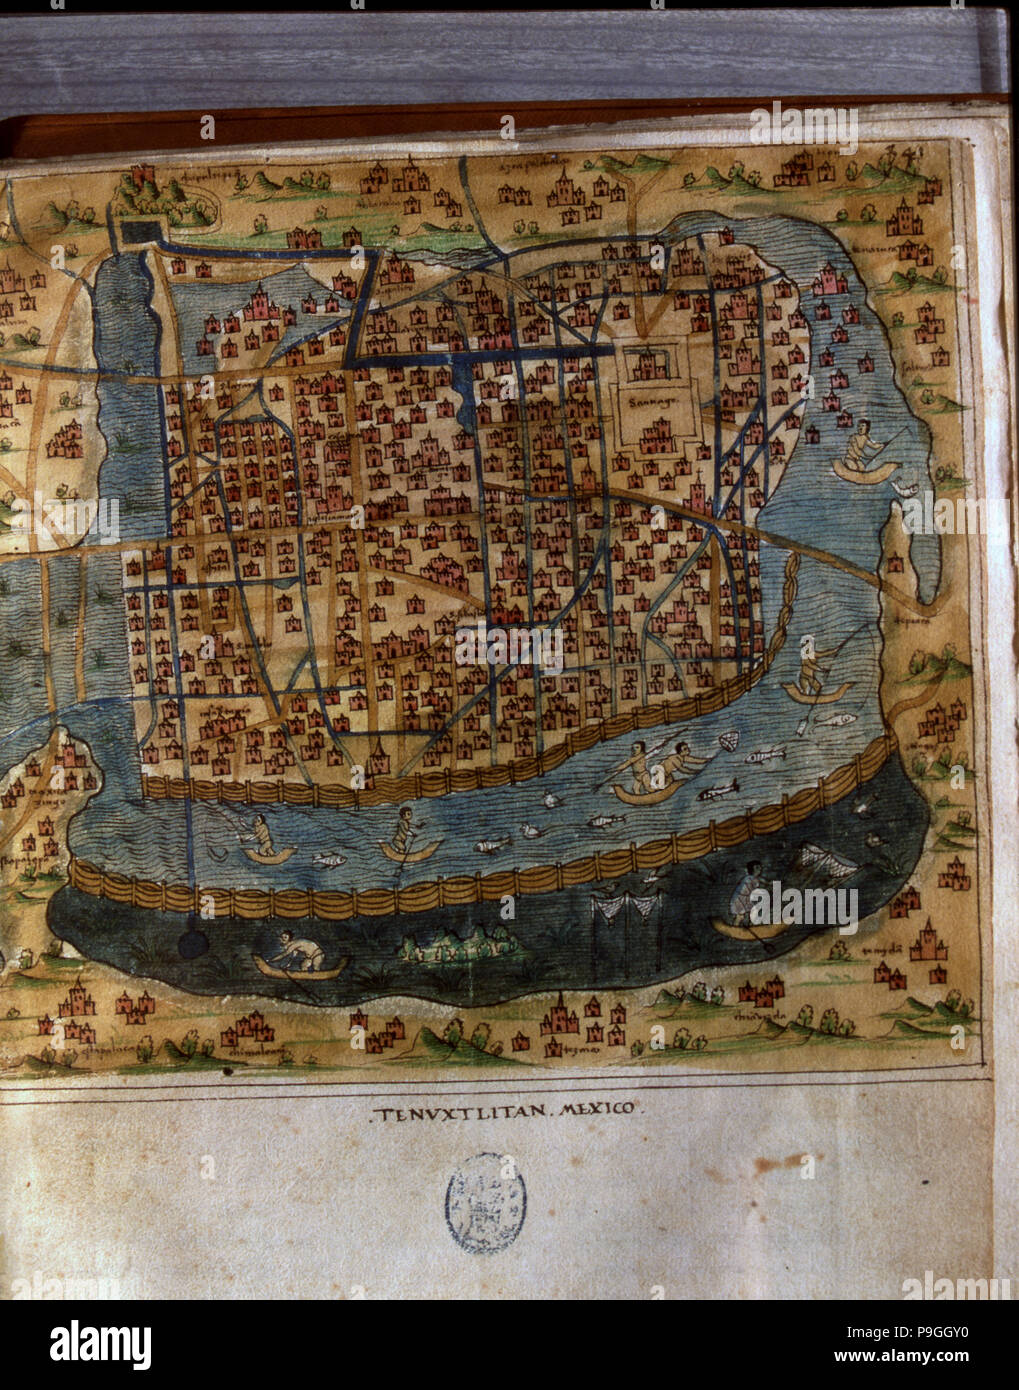 Map of Tenochtitlan, Mexico, 1560, in the work 'General Islands of the World', by the chronicler … Stock Photo